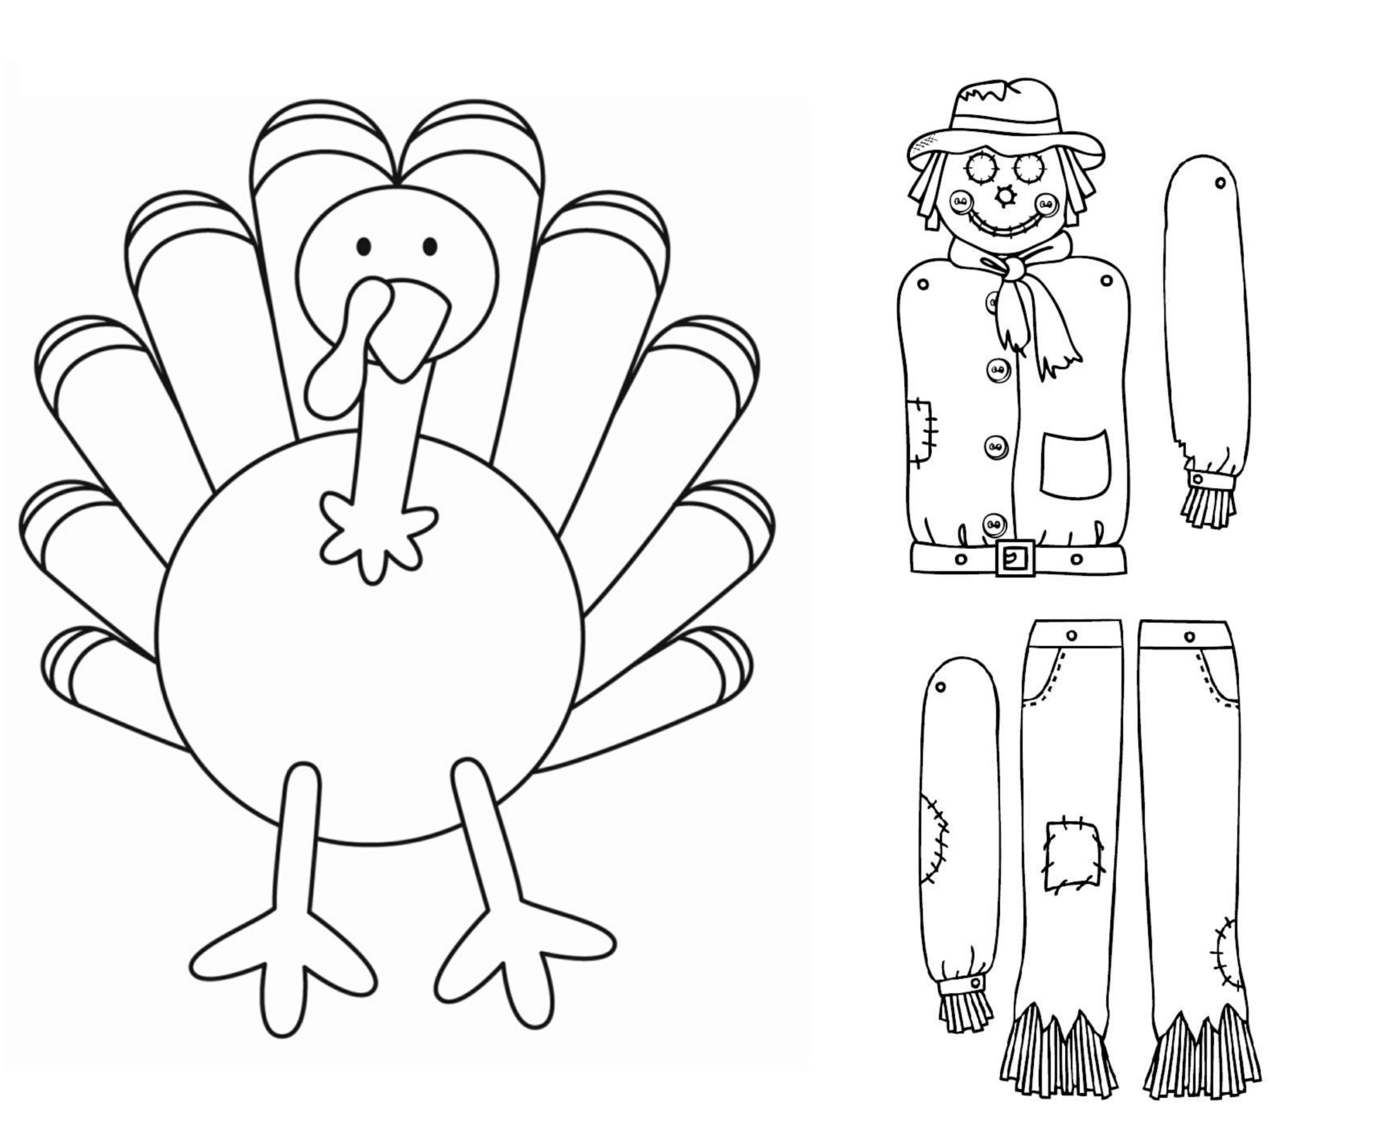 Print turkey and bird feed together from individual elements